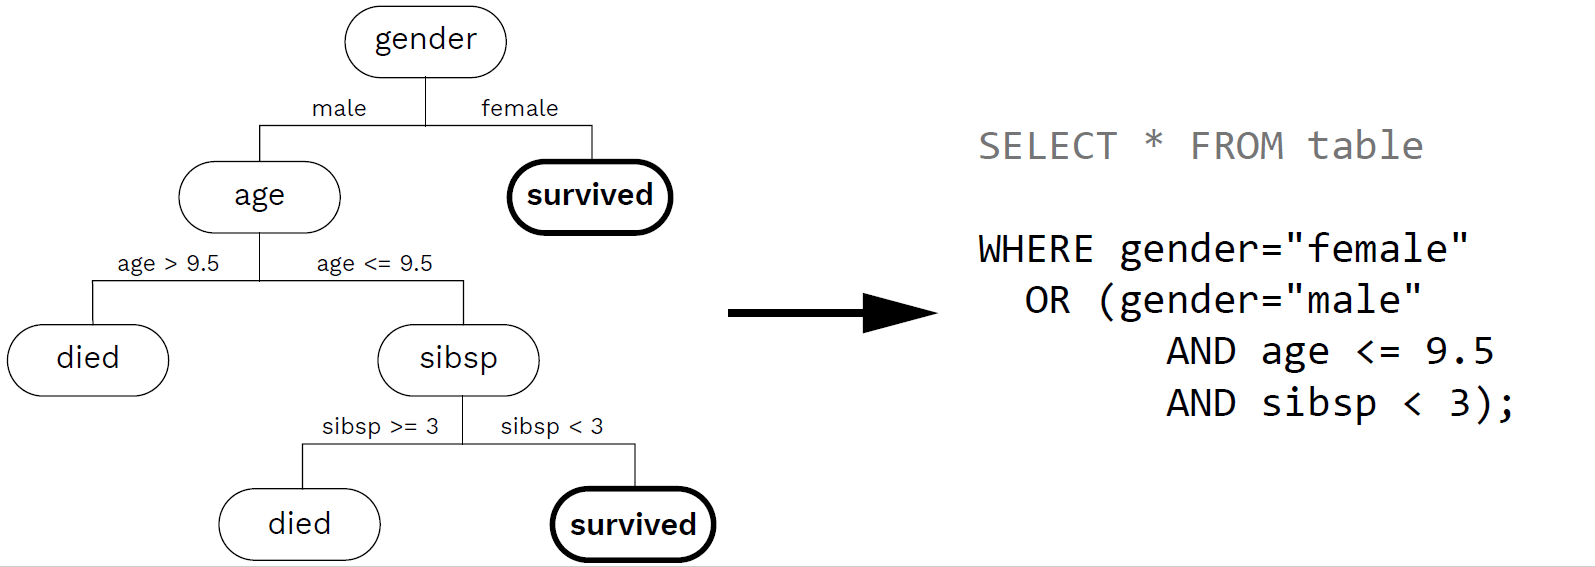 Example of a decision tree being transformed into an SQL query.